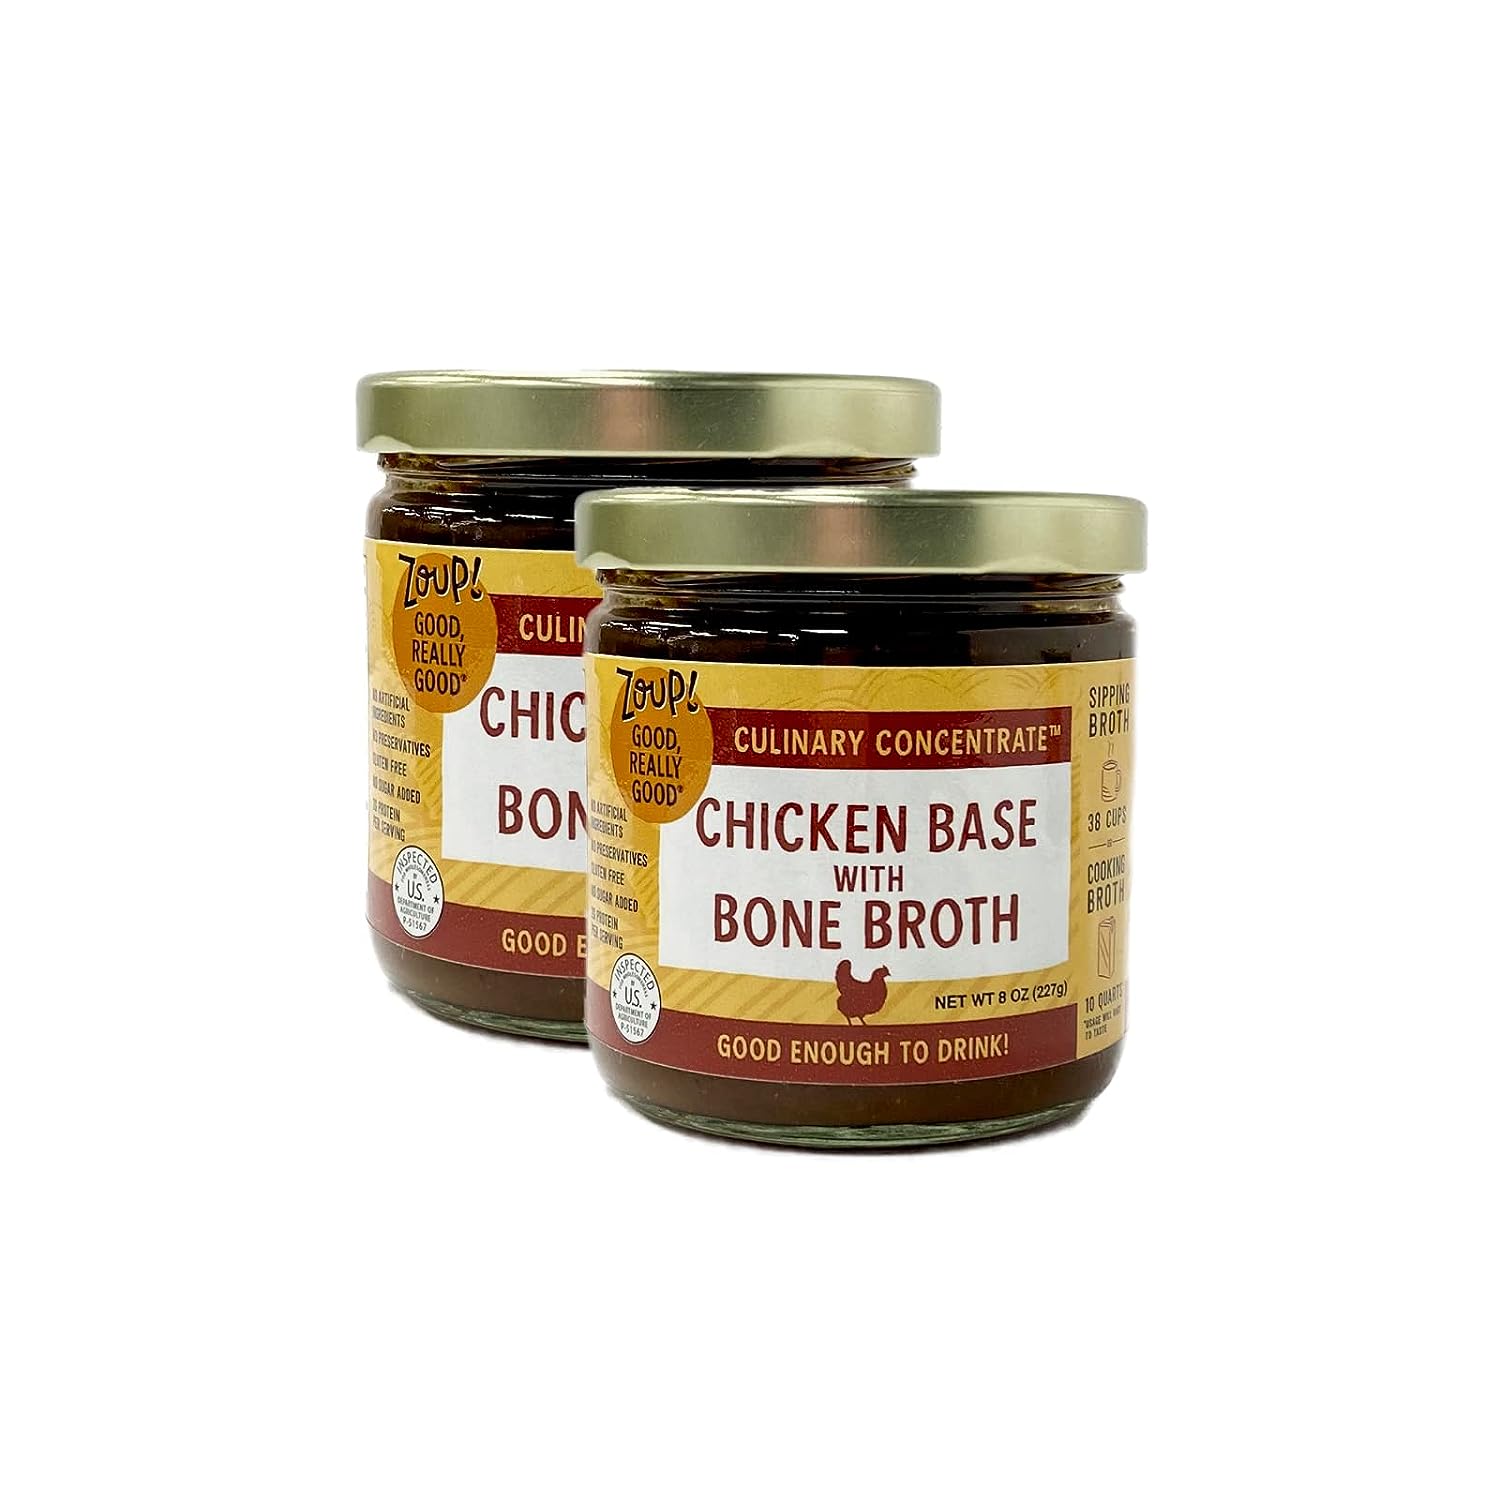 Zoup! Good, Really Good Chicken Bone Broth Culinary Concentrate - Keto-Friendly, Gluten Free, Sugar Free, Non-GMO - Great for Stock, Bouillon, Soup Base or in Gravy - 2-Pack (8 oz)